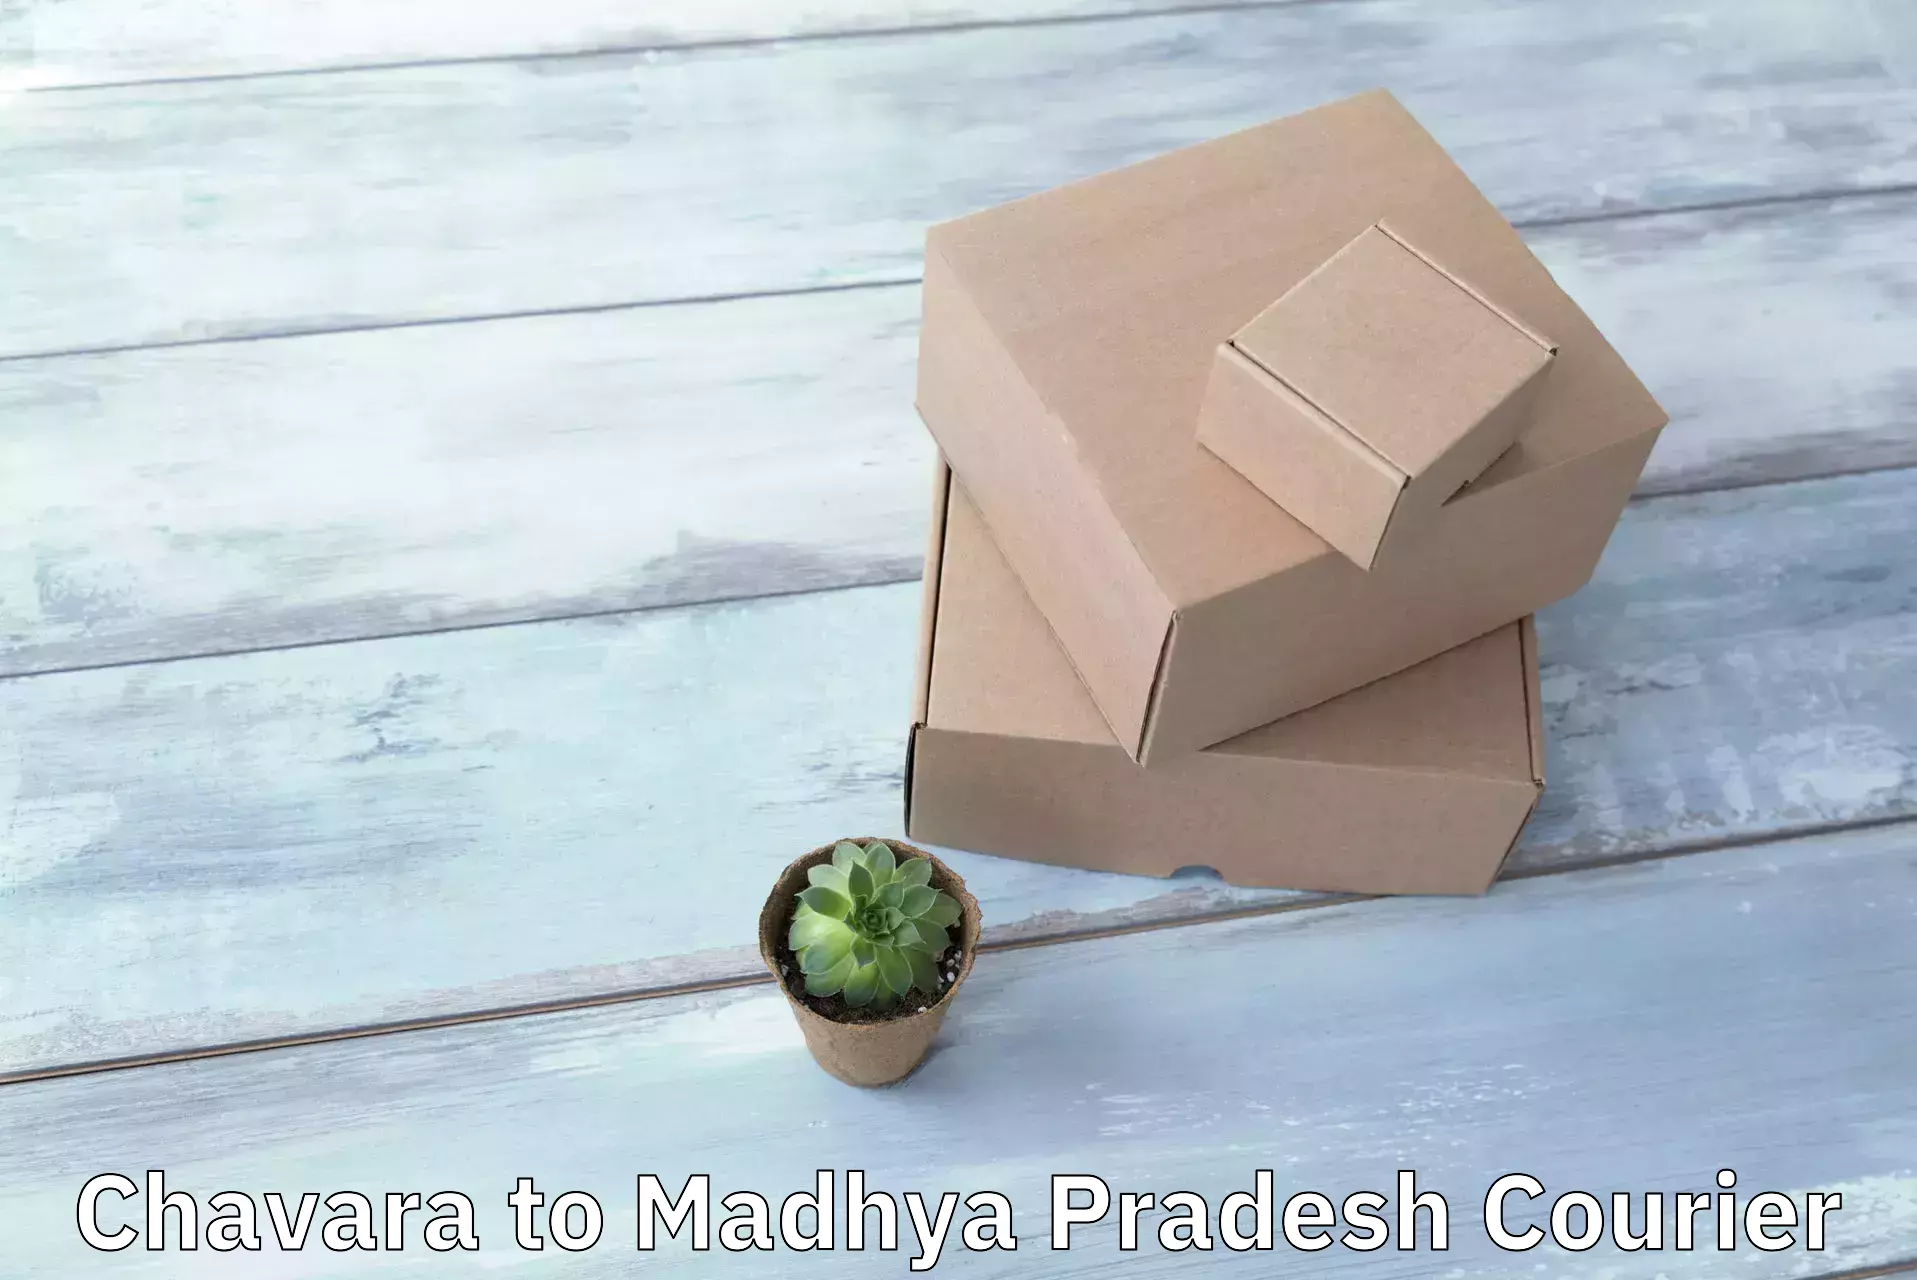 Easy access courier services in Chavara to Hatta